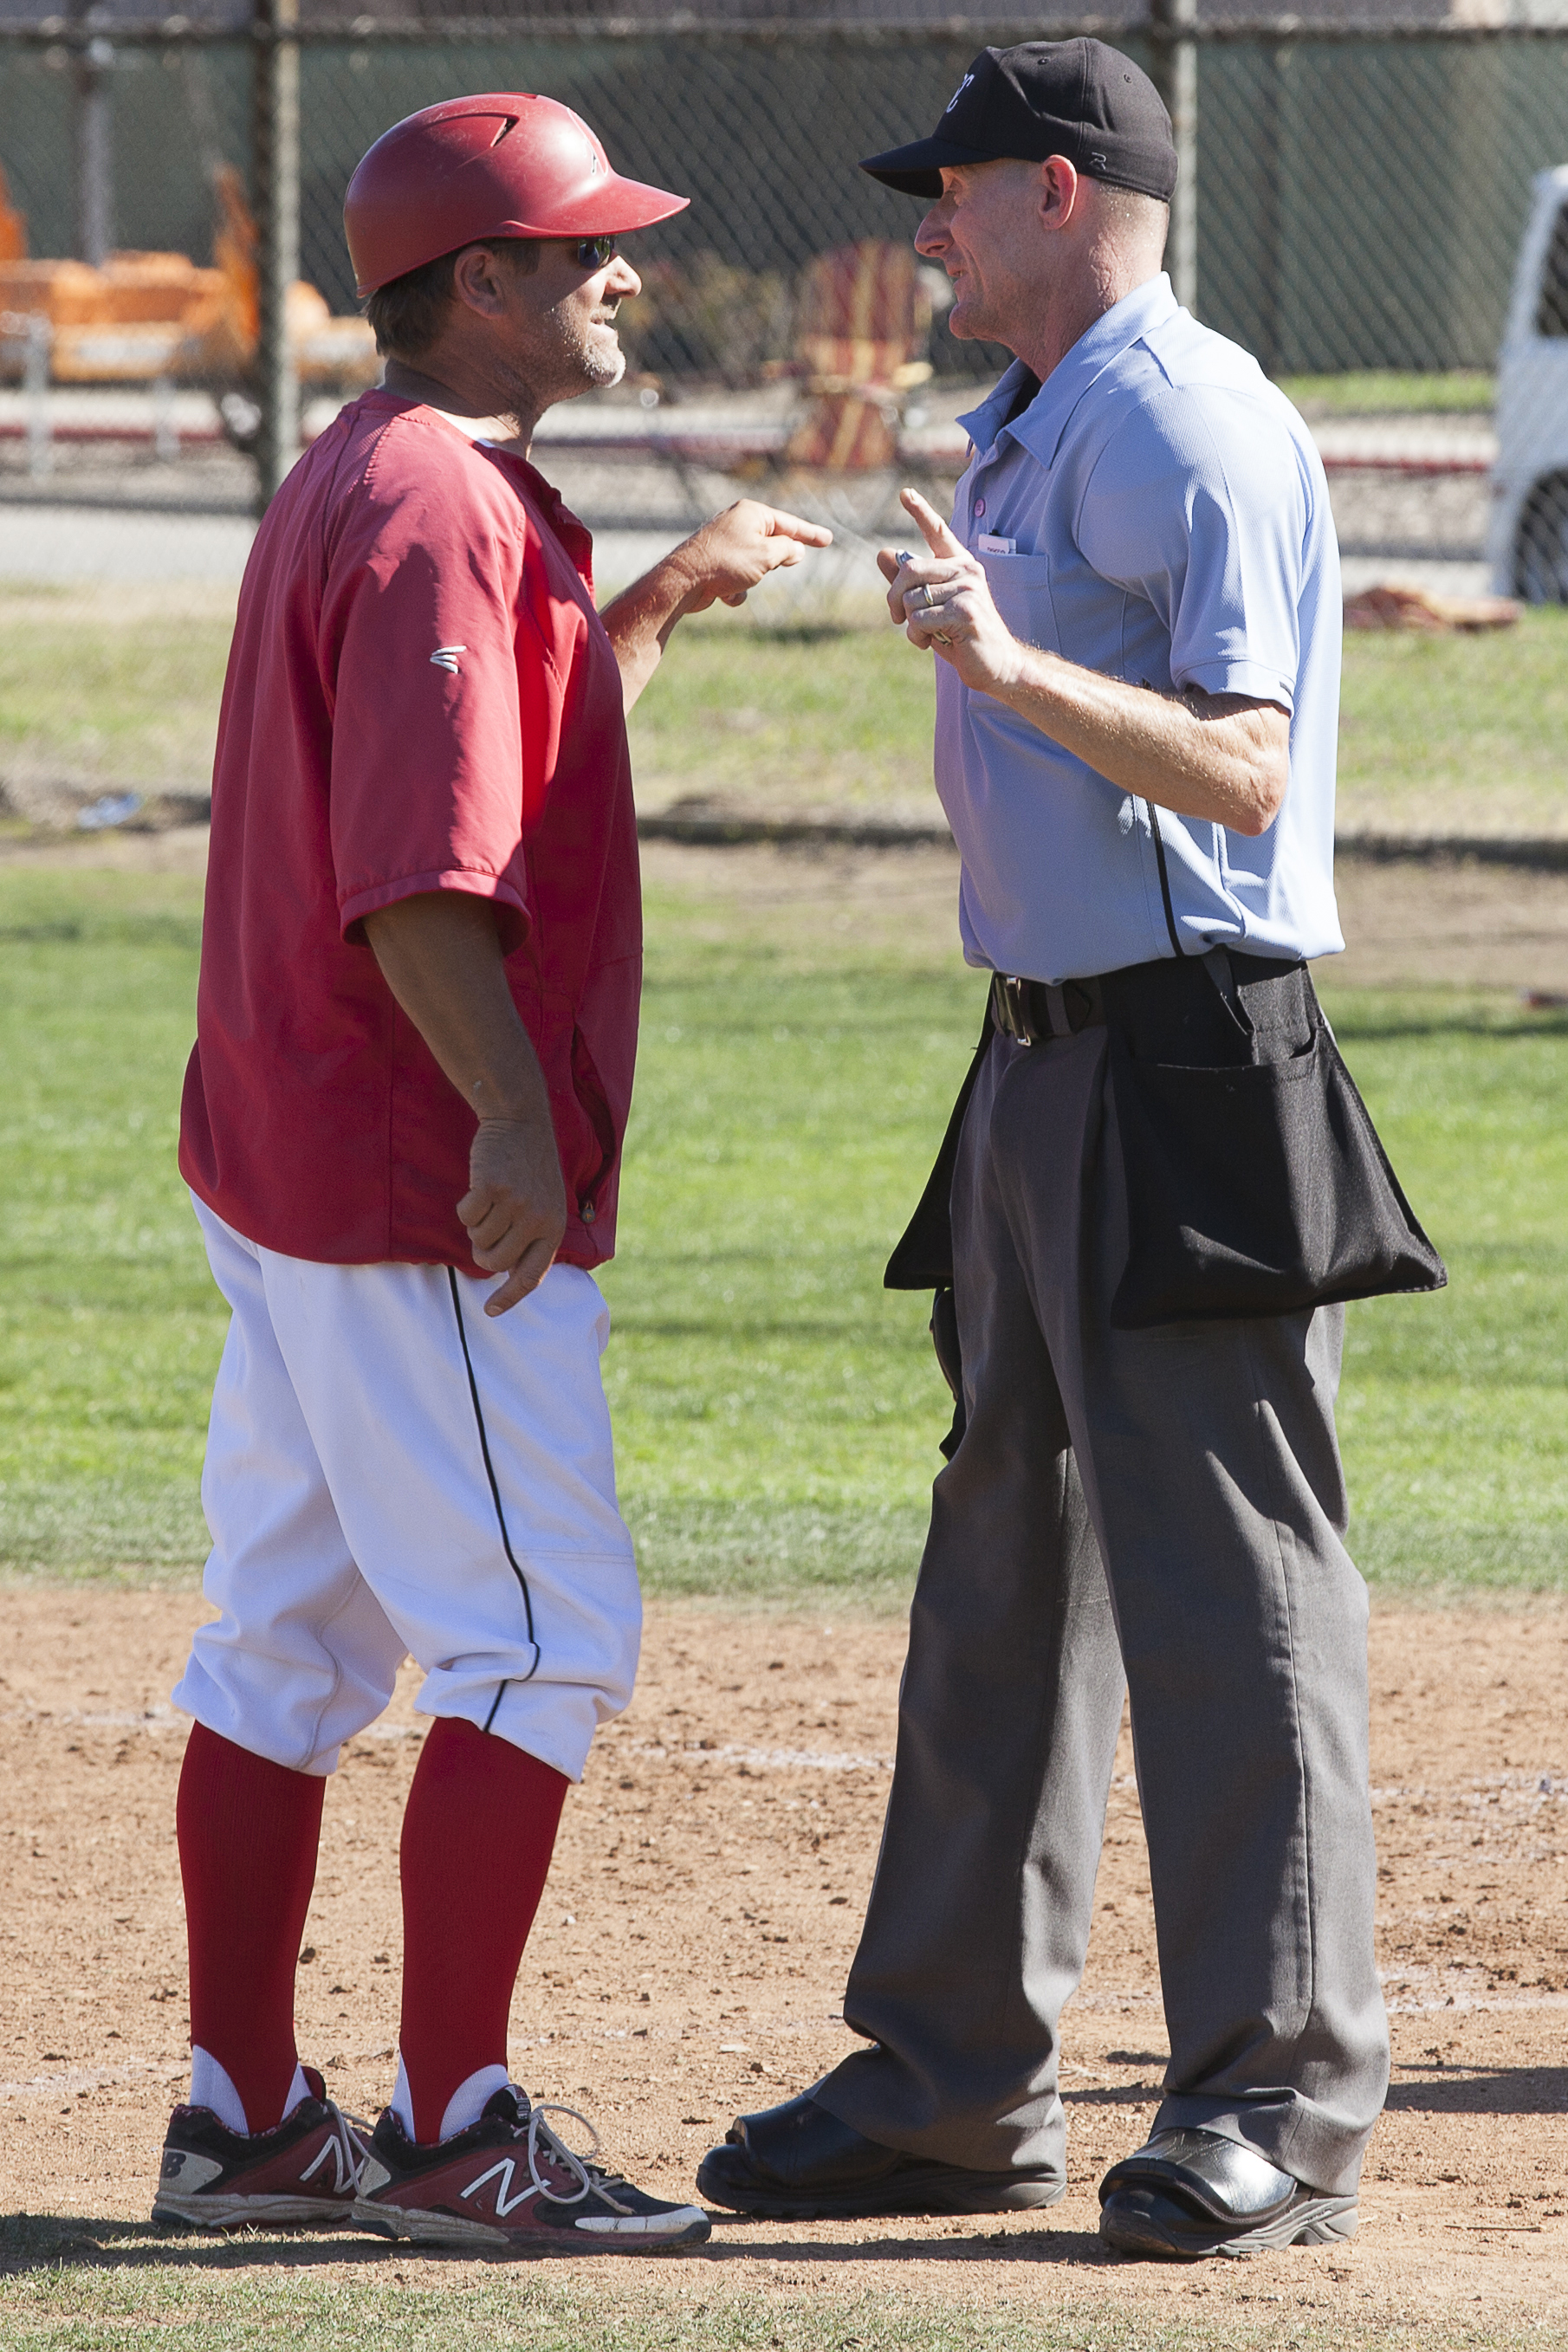  Coach Bill Picketts argues with the umpire over a non-hit batter call in the bottom of the second inning during a home game against Glendale College in Woodland Hills, Calif., on Saturday, Feb. 13, 2016.&nbsp; 